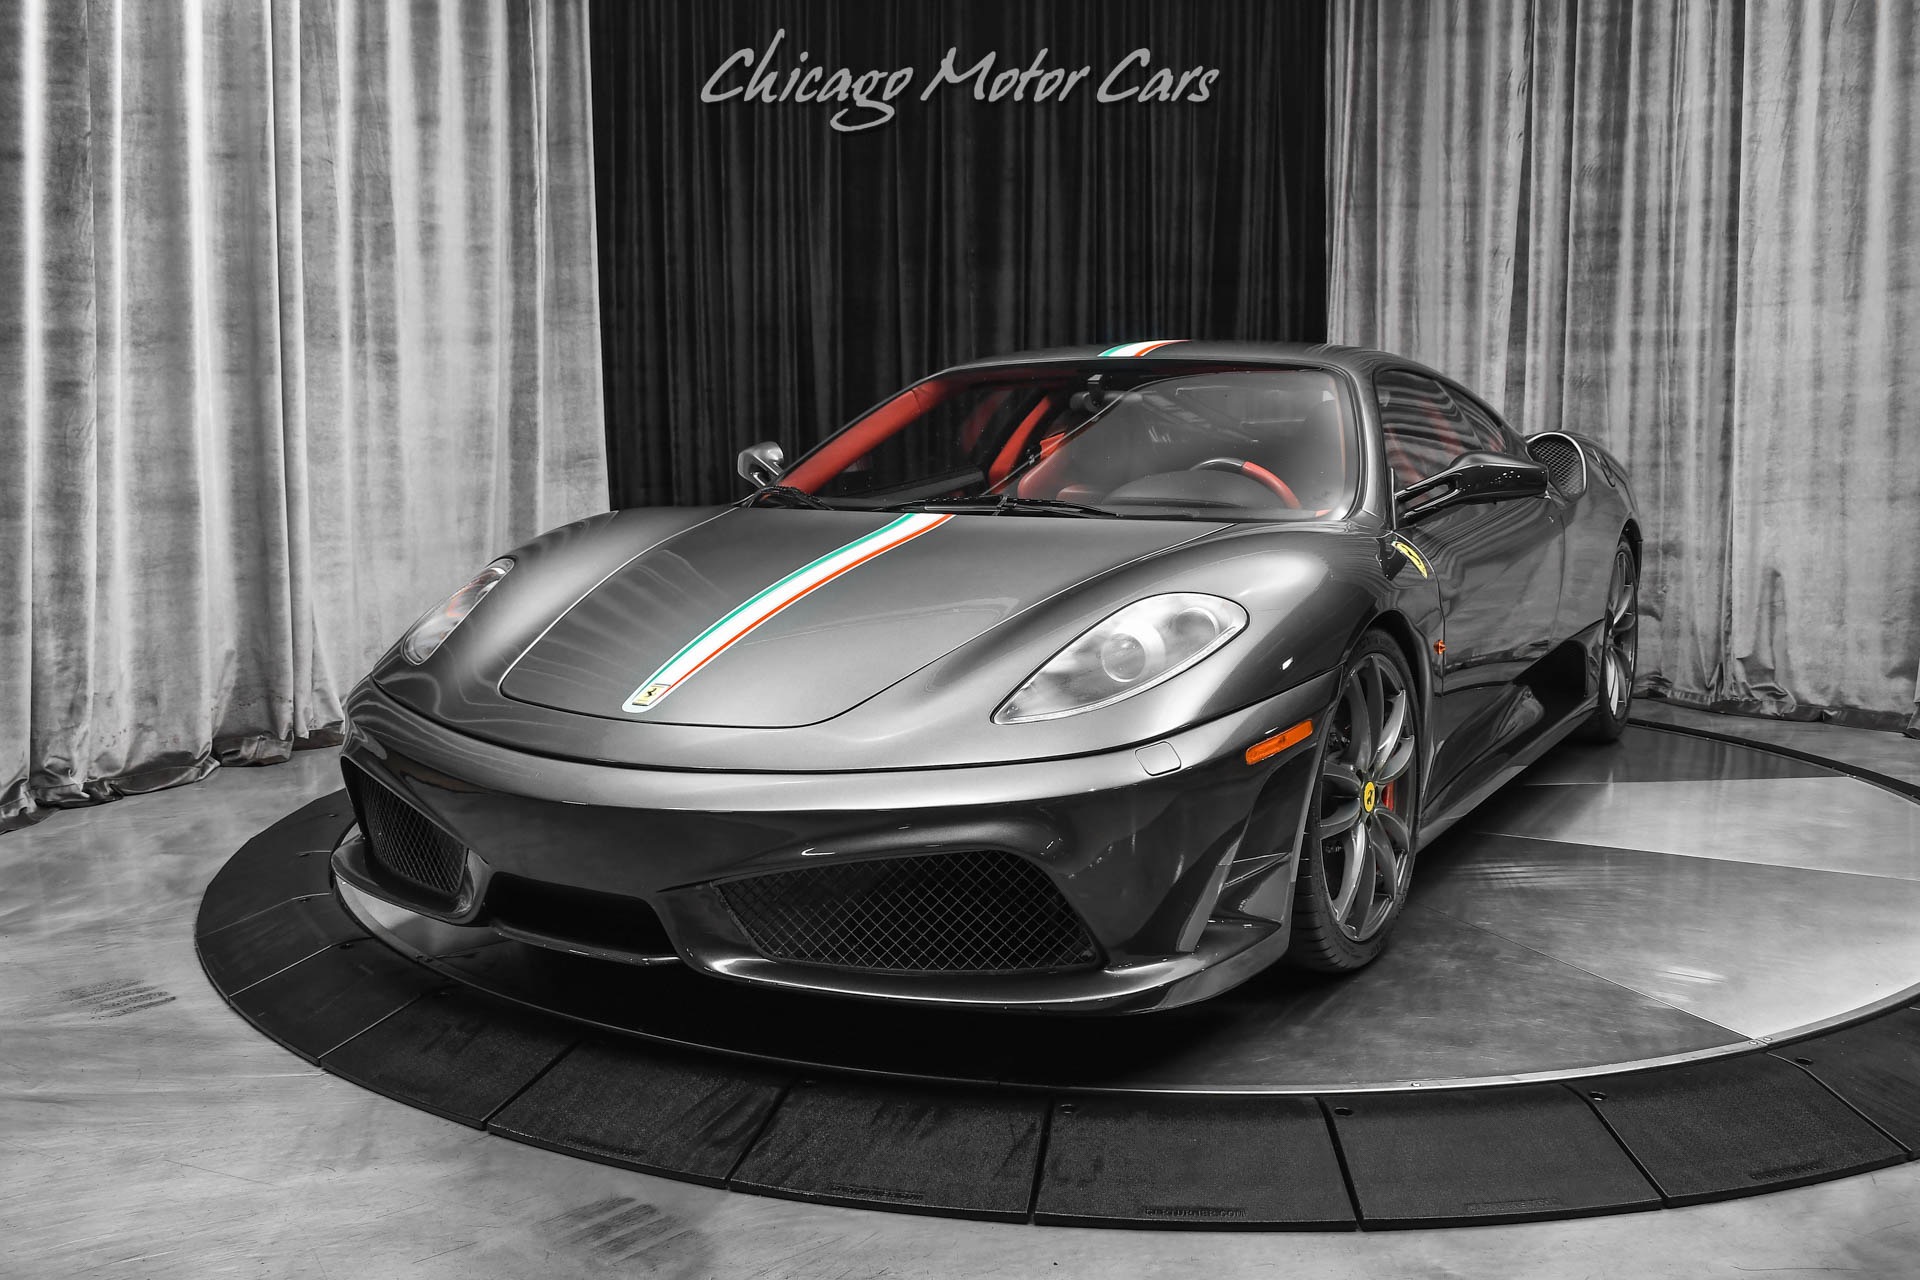 Used-2009-Ferrari-430-Scuderia-Coupe-Racing-Stripe-Special-Features-Leather-Upholstery-TONS-of-Carbon